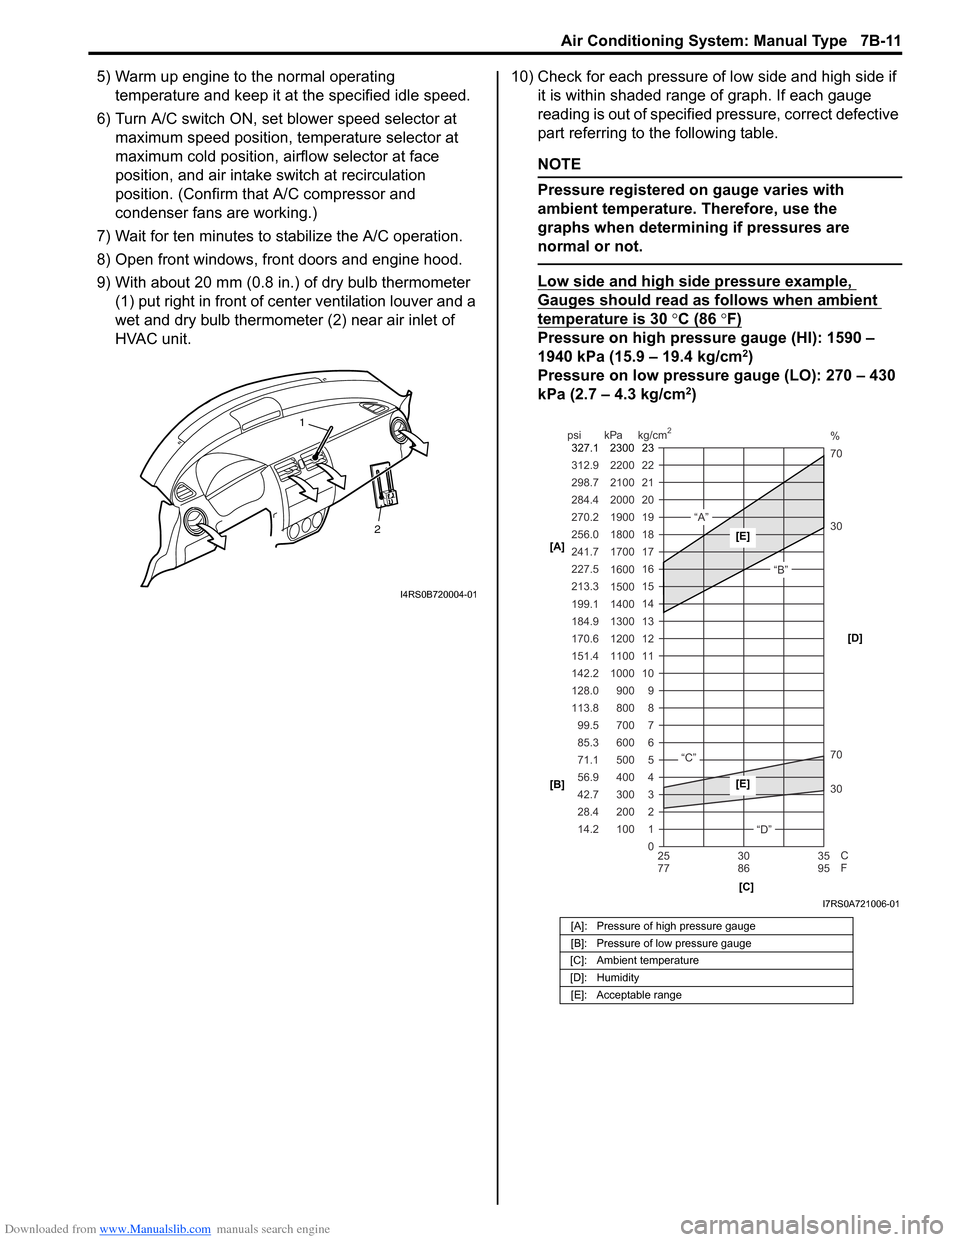 SUZUKI SWIFT 2006 2.G Service Manual PDF Downloaded from www.Manualslib.com manuals search engine Air Conditioning System: Manual Type 7B-11
5) Warm up engine to the normal operating temperature and keep it at the specified idle speed.
6) Tu